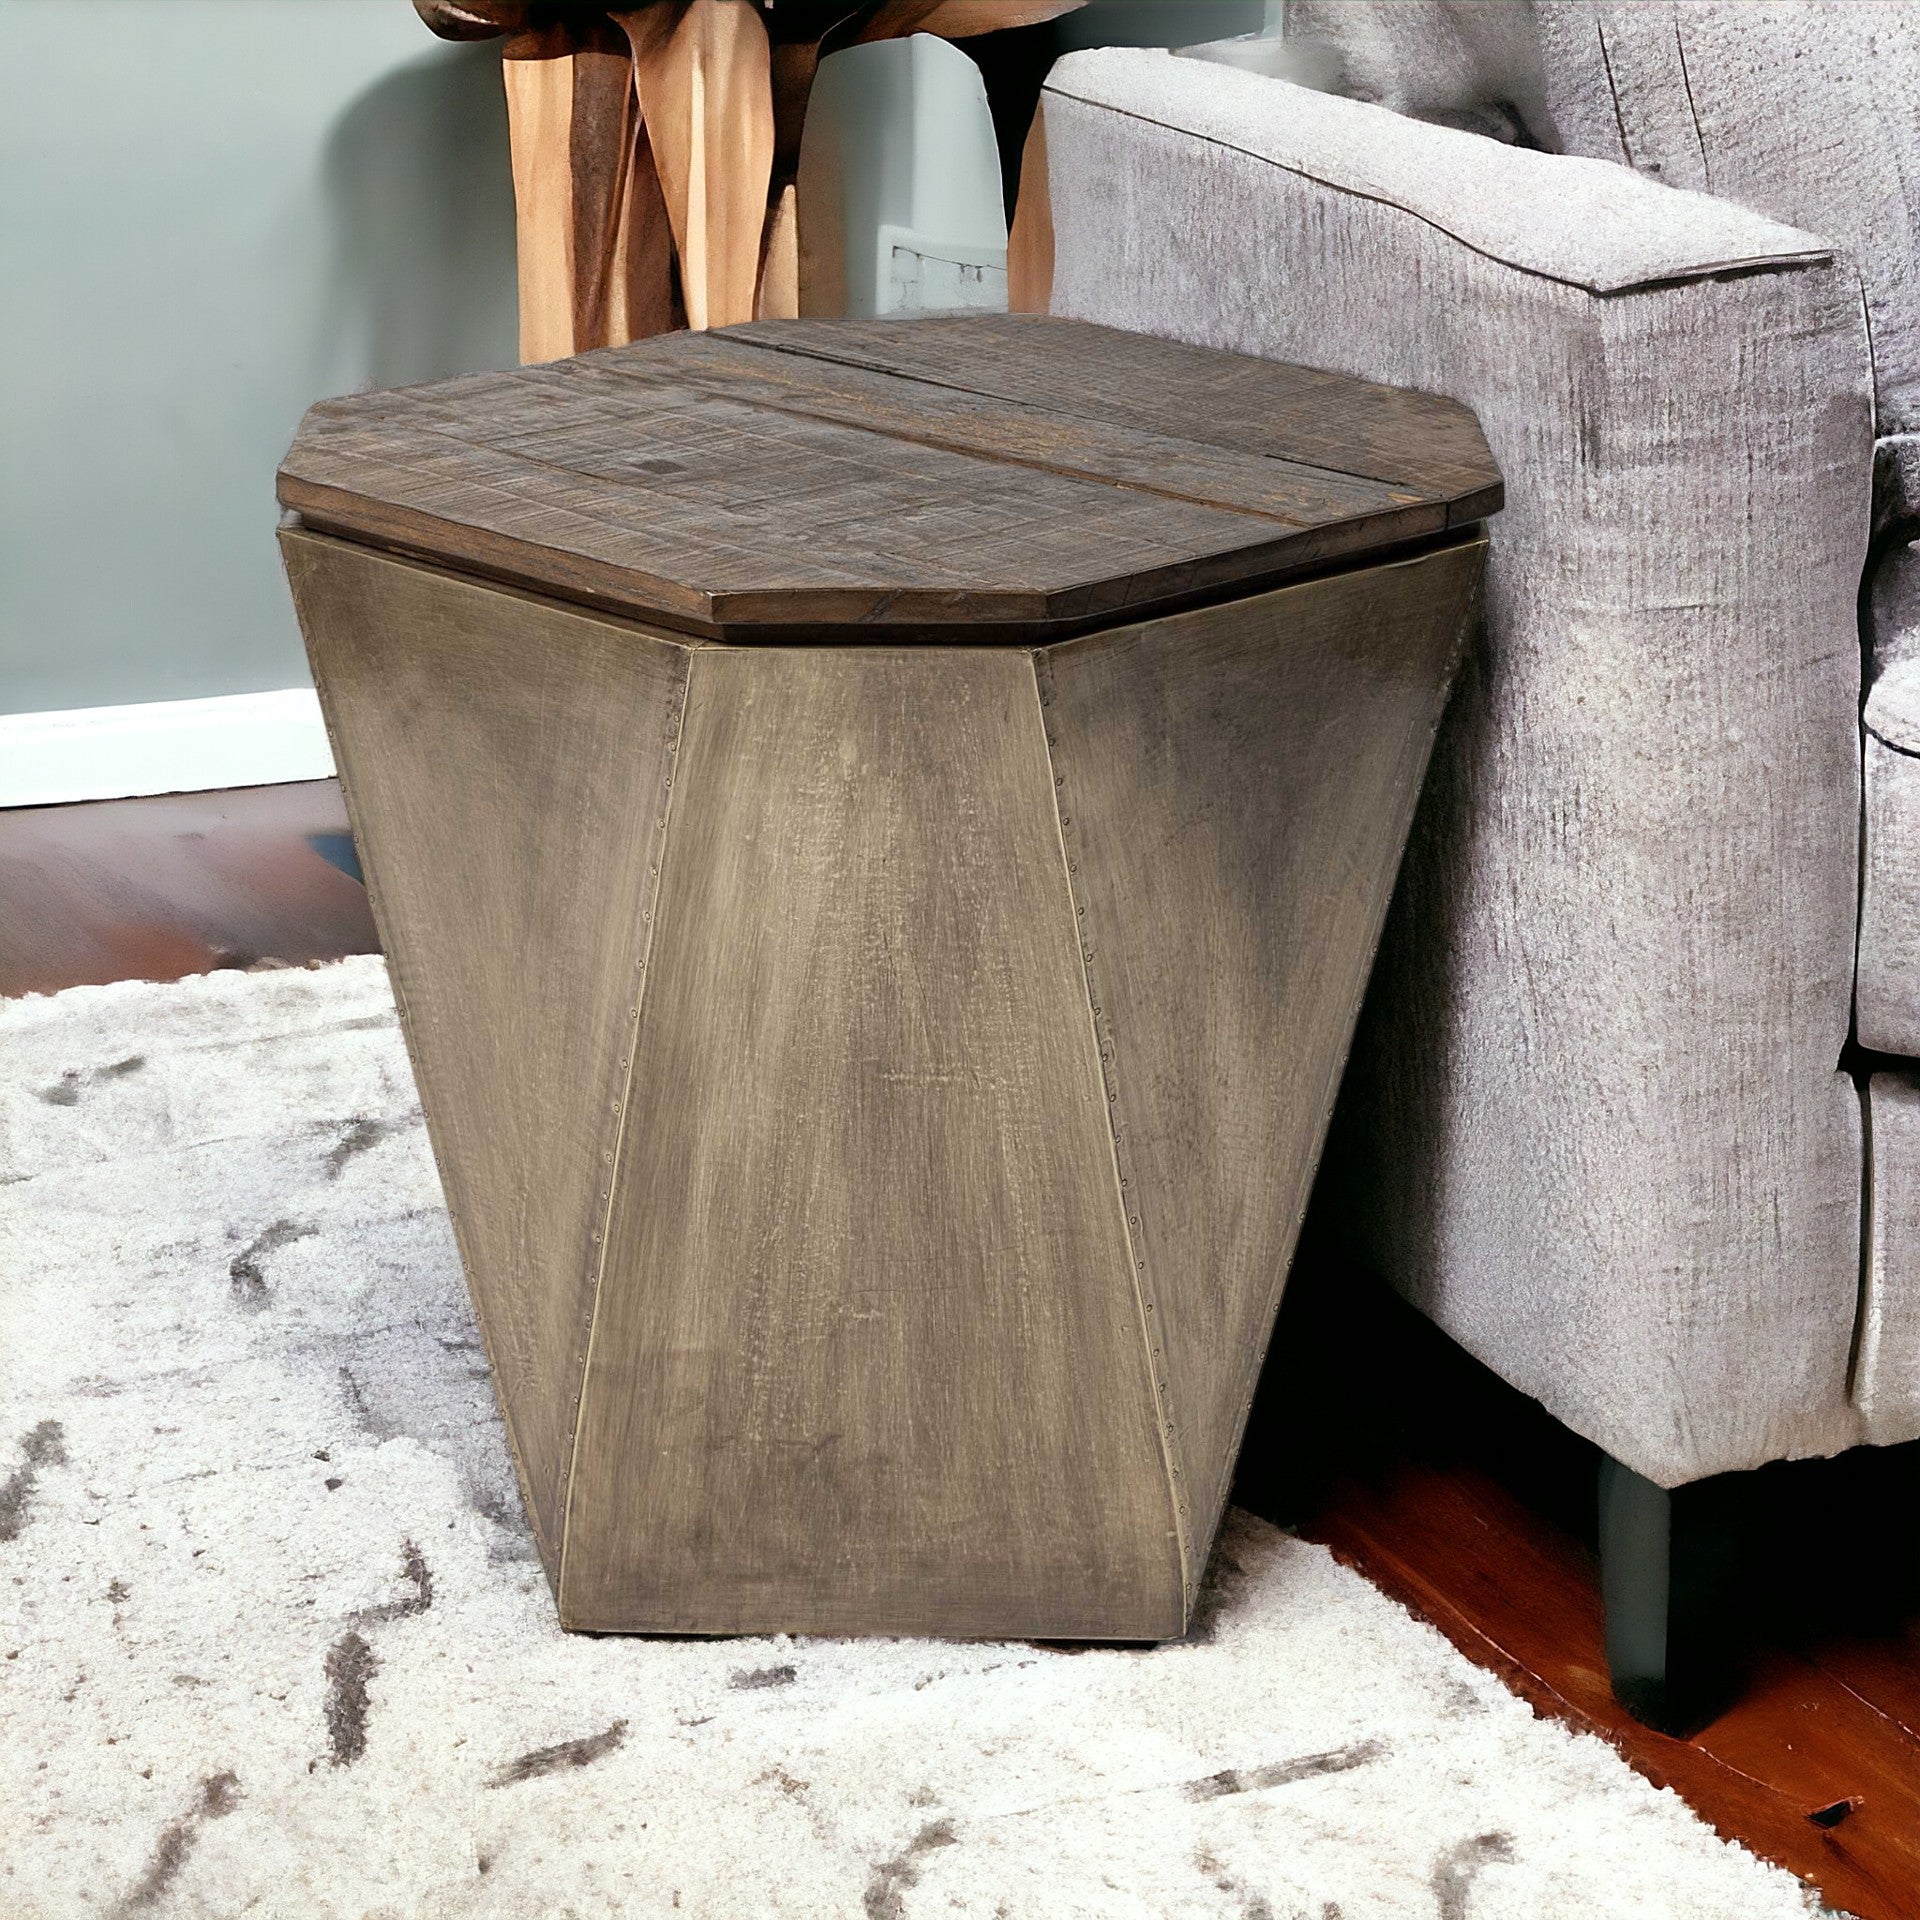 21" Brown Solid Wood End Table